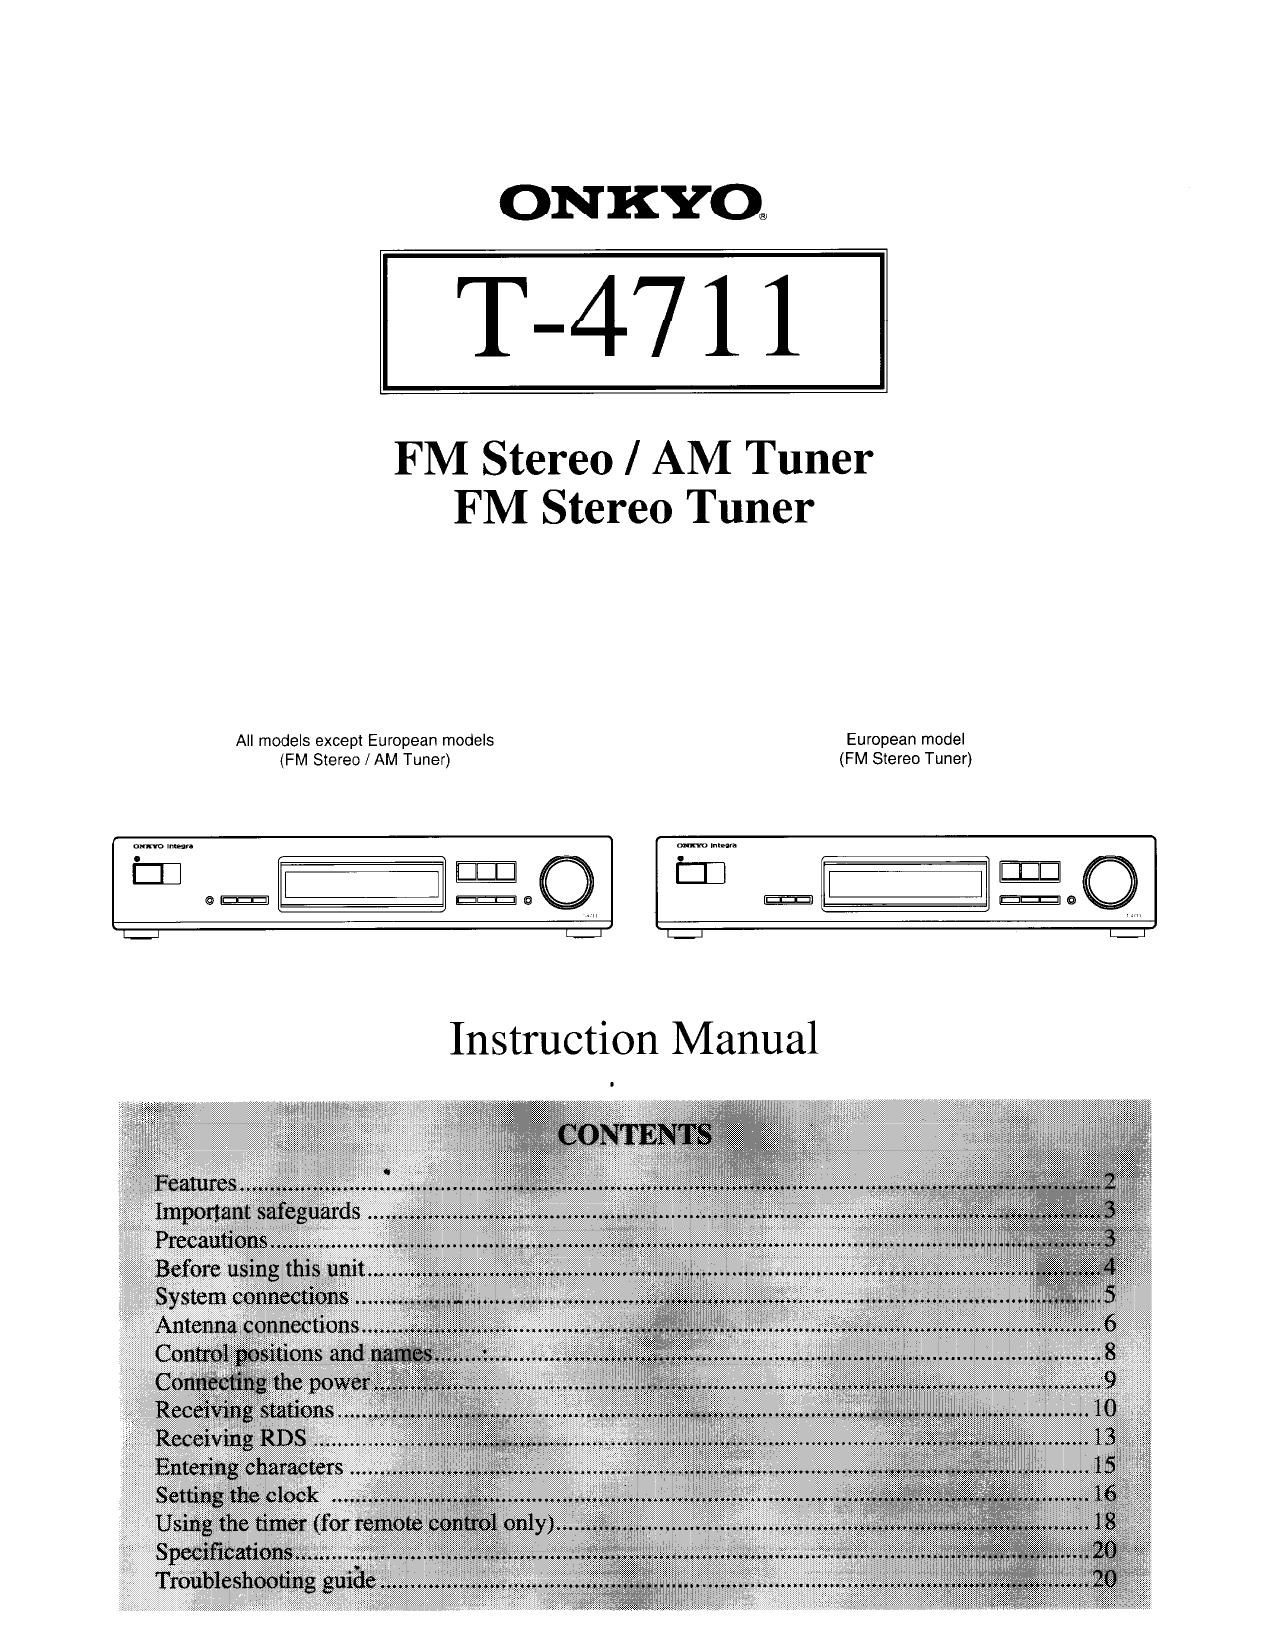 Onkyo T 4711 Owners Manual